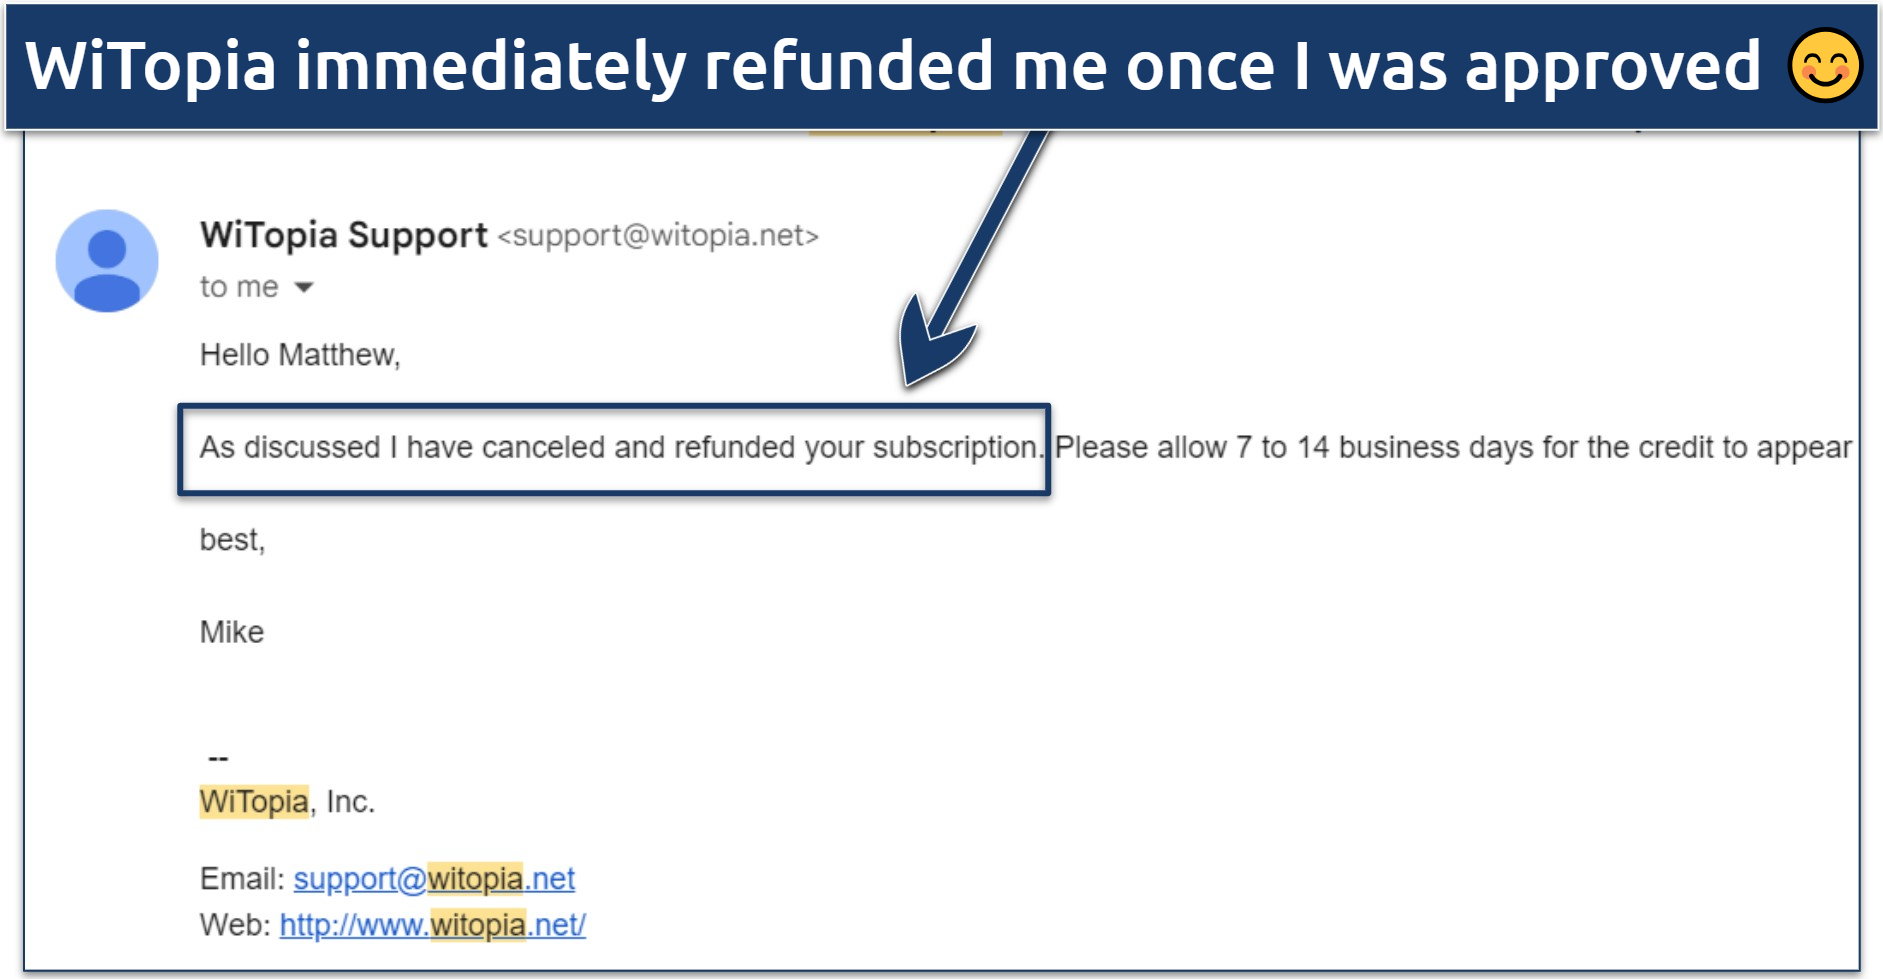 Screenshot of an email from WiTopia support letting me know my cancellation and refund were approved 